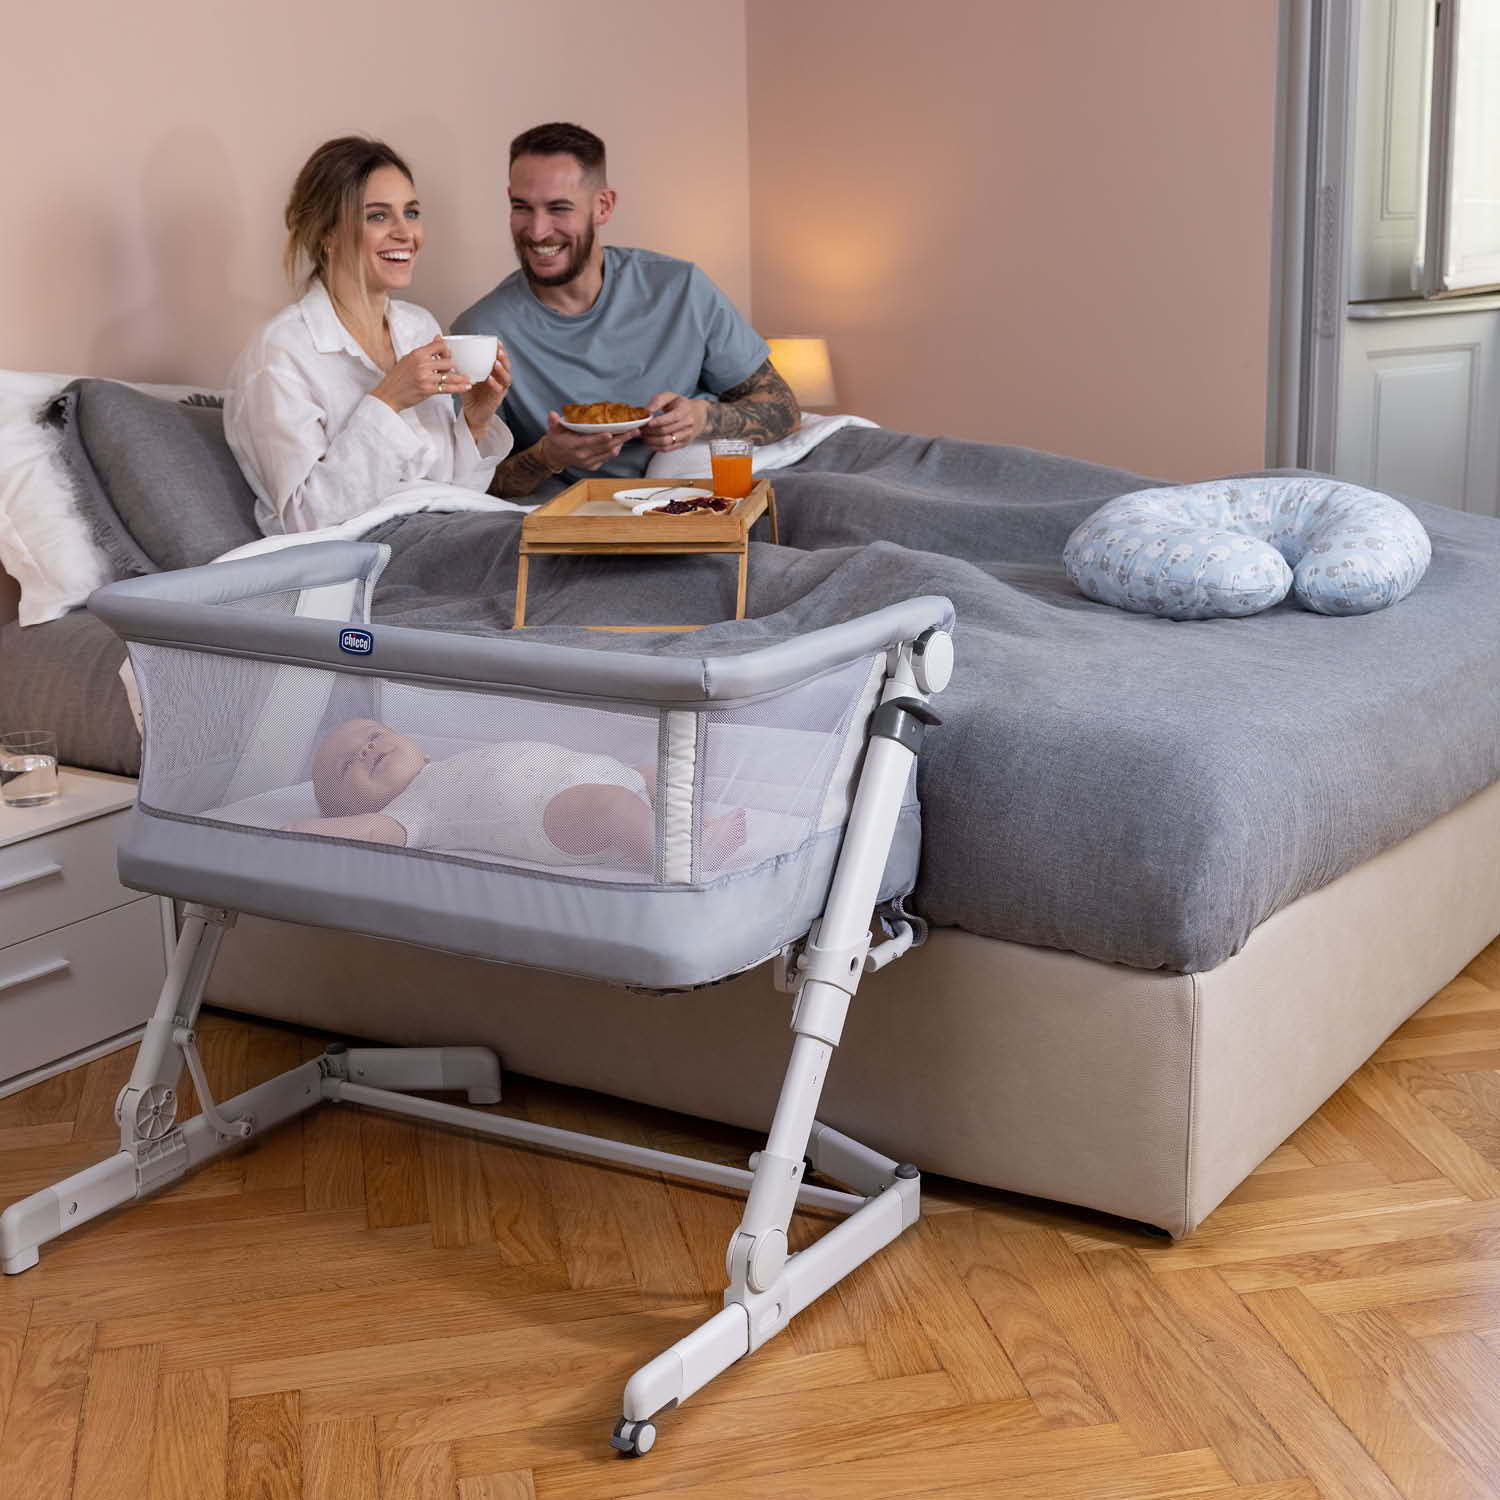 Chicco Next2Me Magic bedside crib review - Cribs & moses baskets